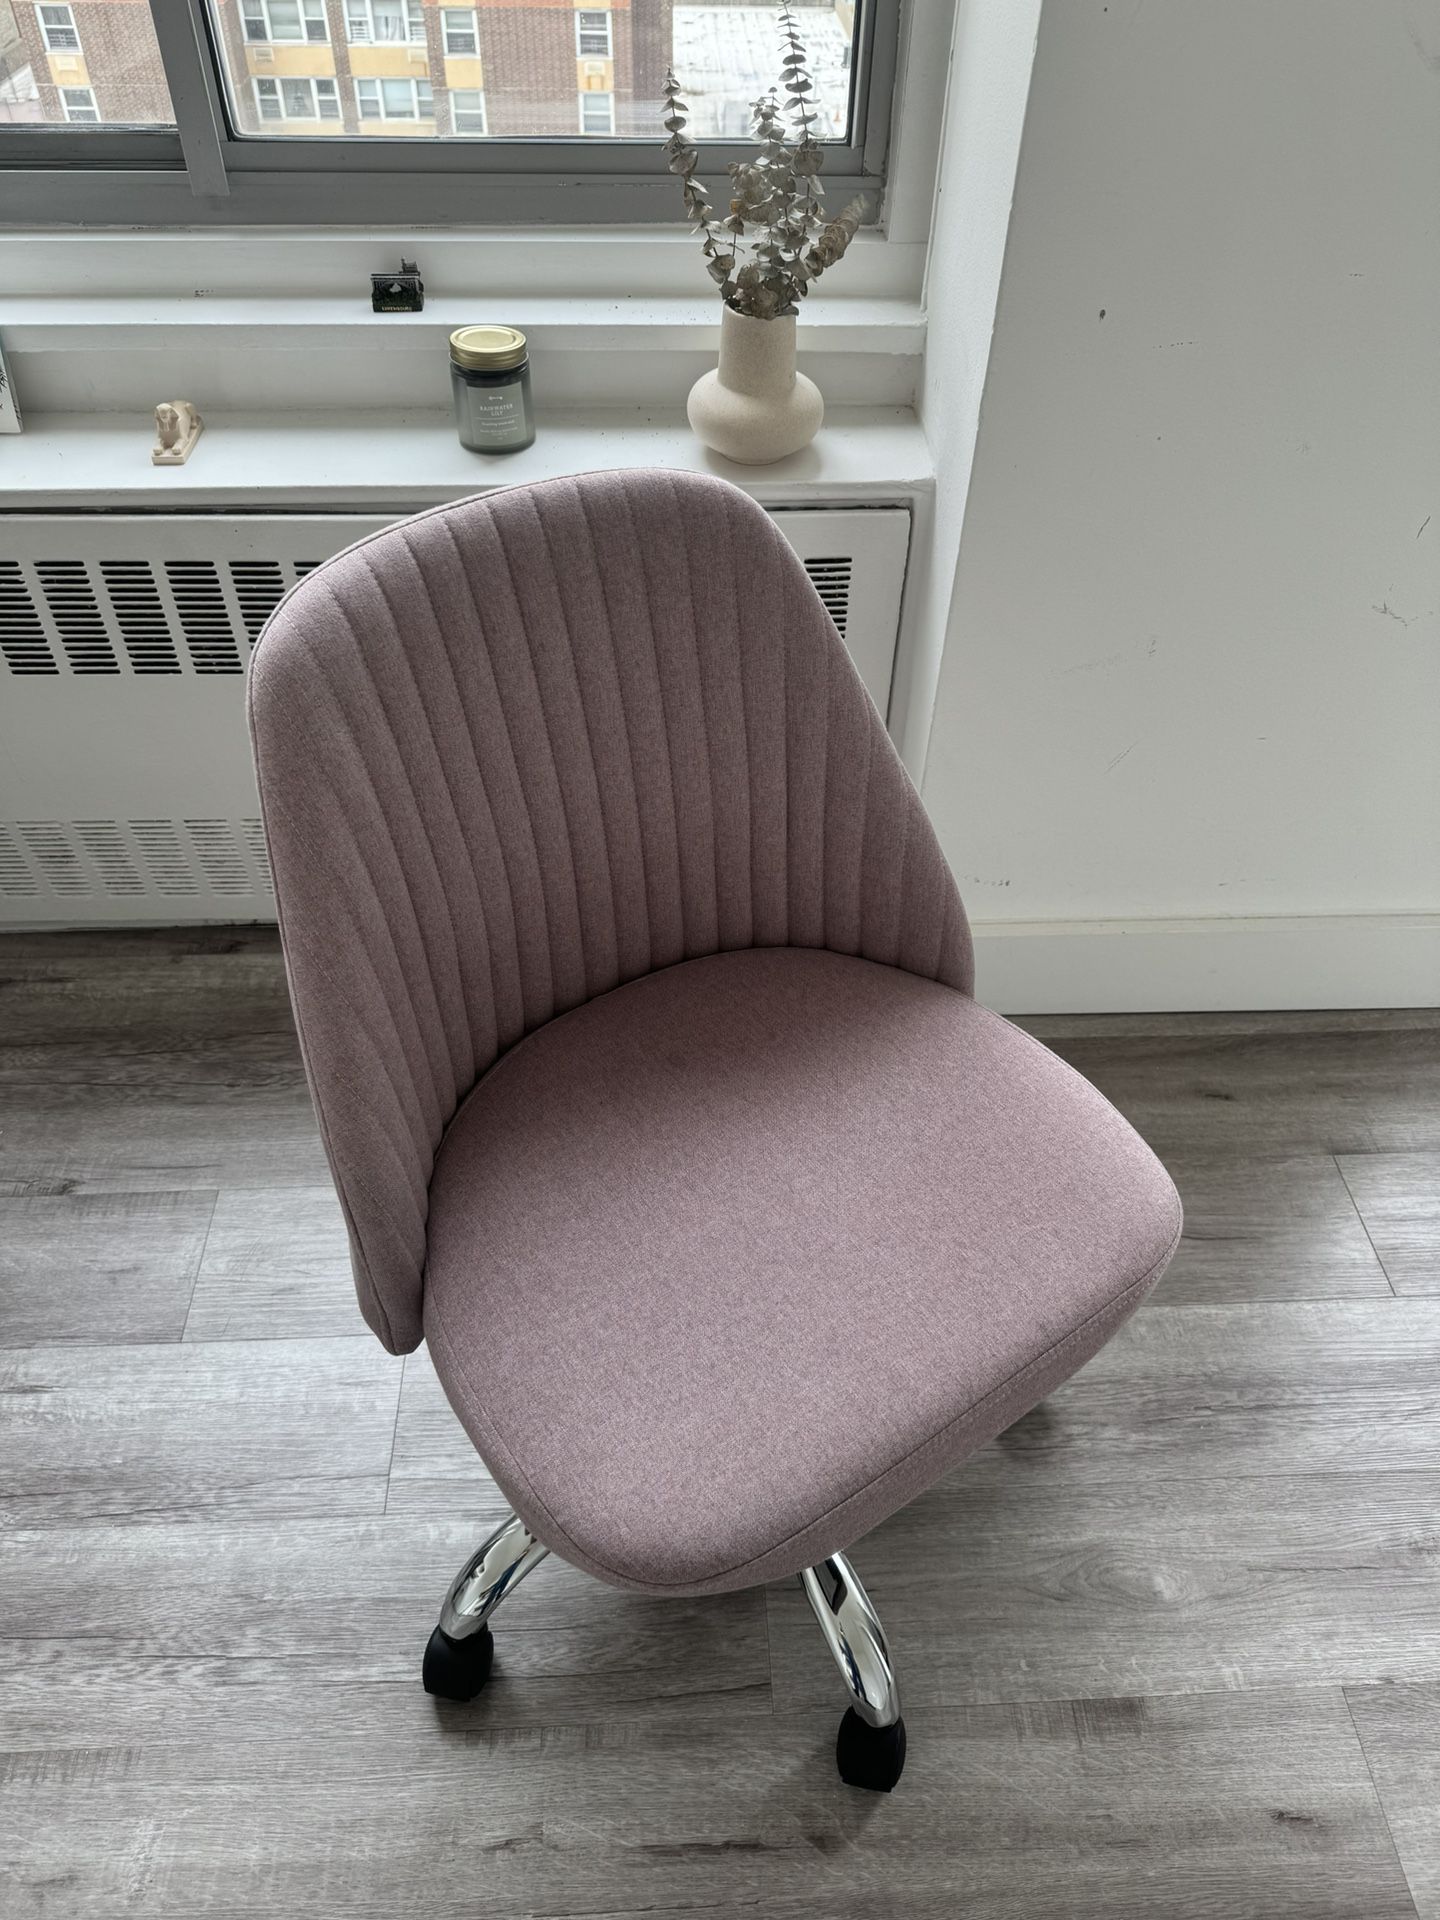 Cute Pink Office Chair